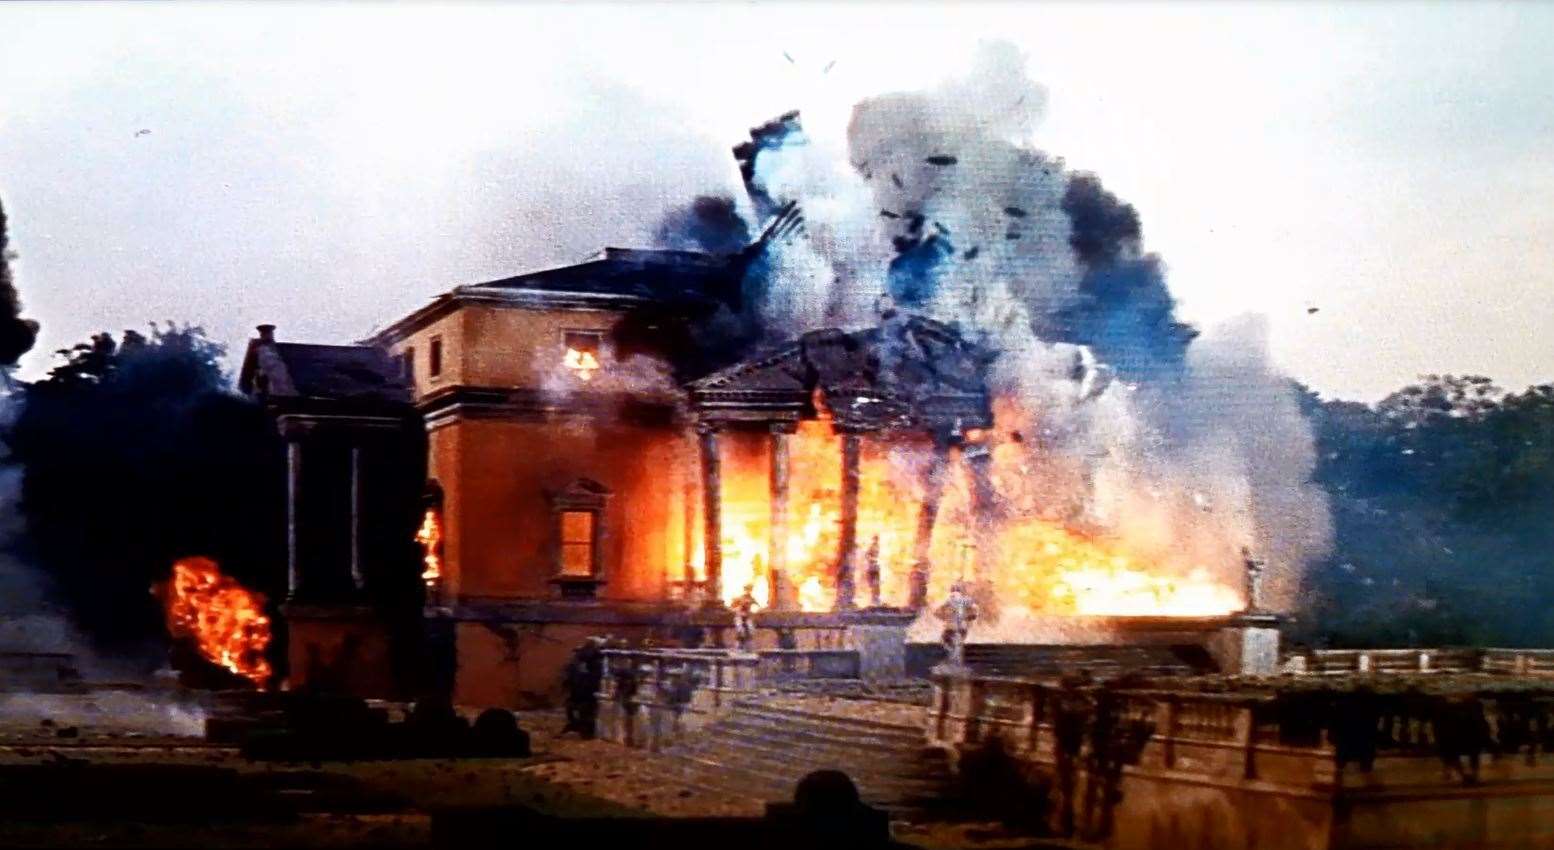 Mereworth Castle is blown up in Casino Royale